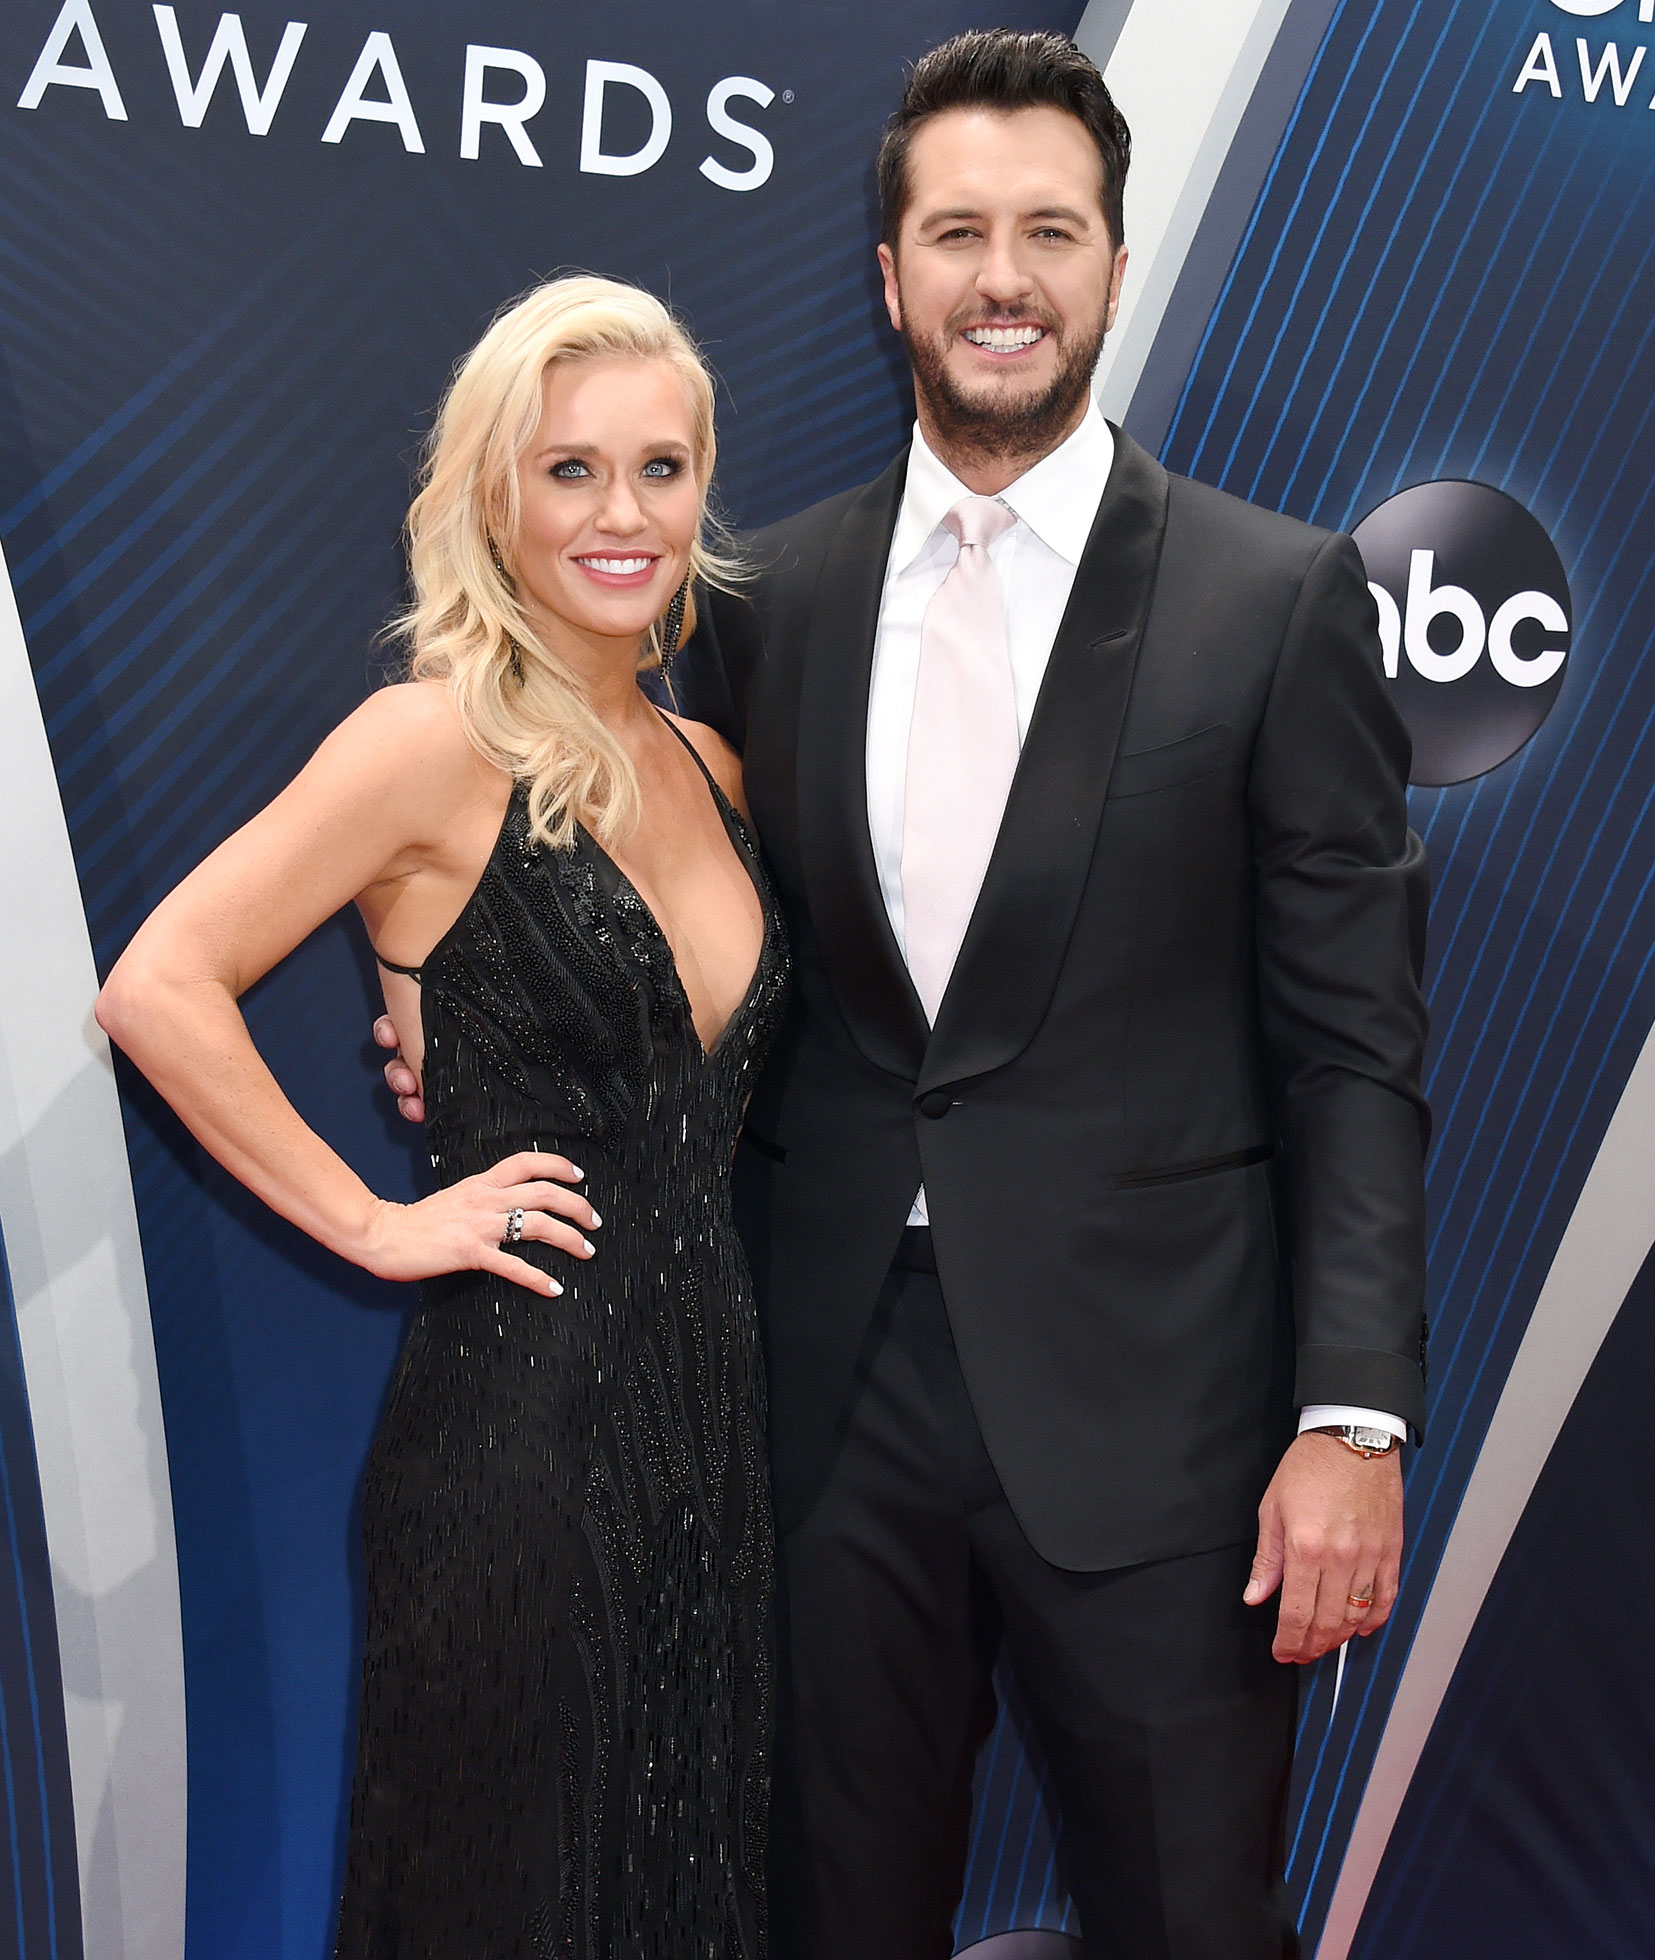 Luke Bryan Says Make-Up Sex Is the Secret to His Marriage pic